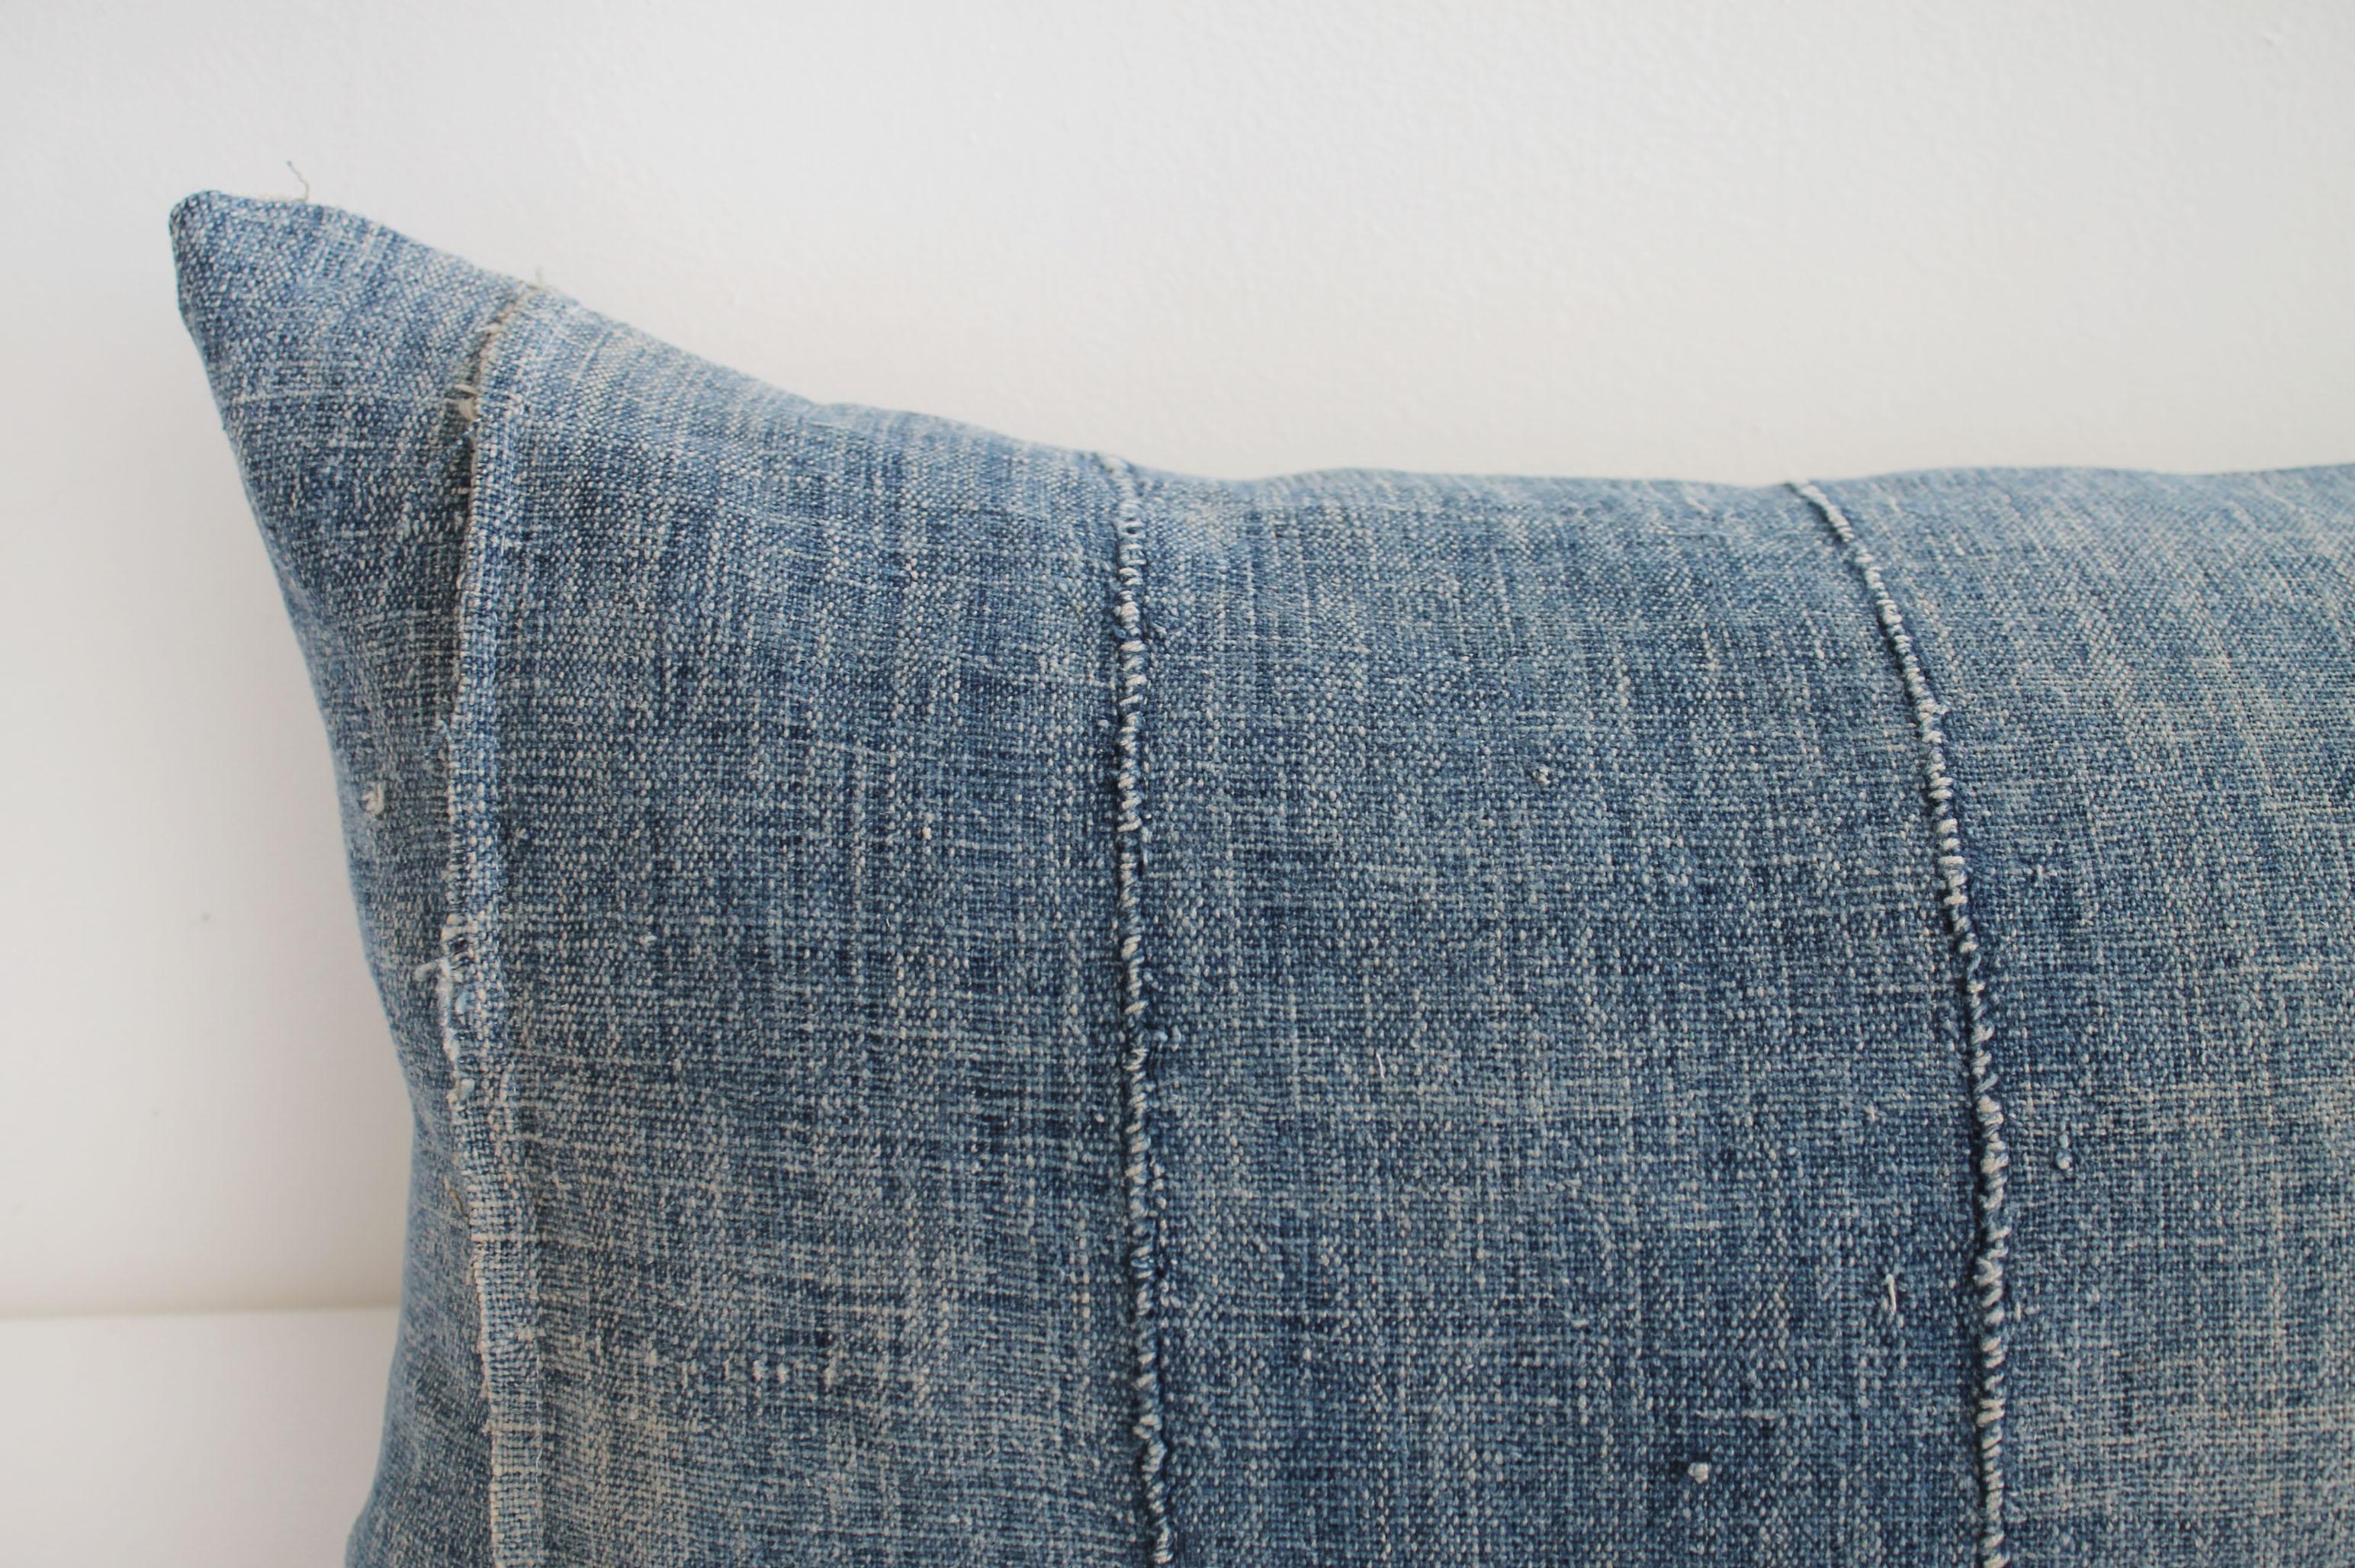 Vintage Indigo mud cloth lumbar roll pillow
Made in our studio, from vintage cloth, this soft almost linen textured pillow has a beautiful faded denim look, but is soft to the hand. Original seams give this a charm and collected feel.
The backing